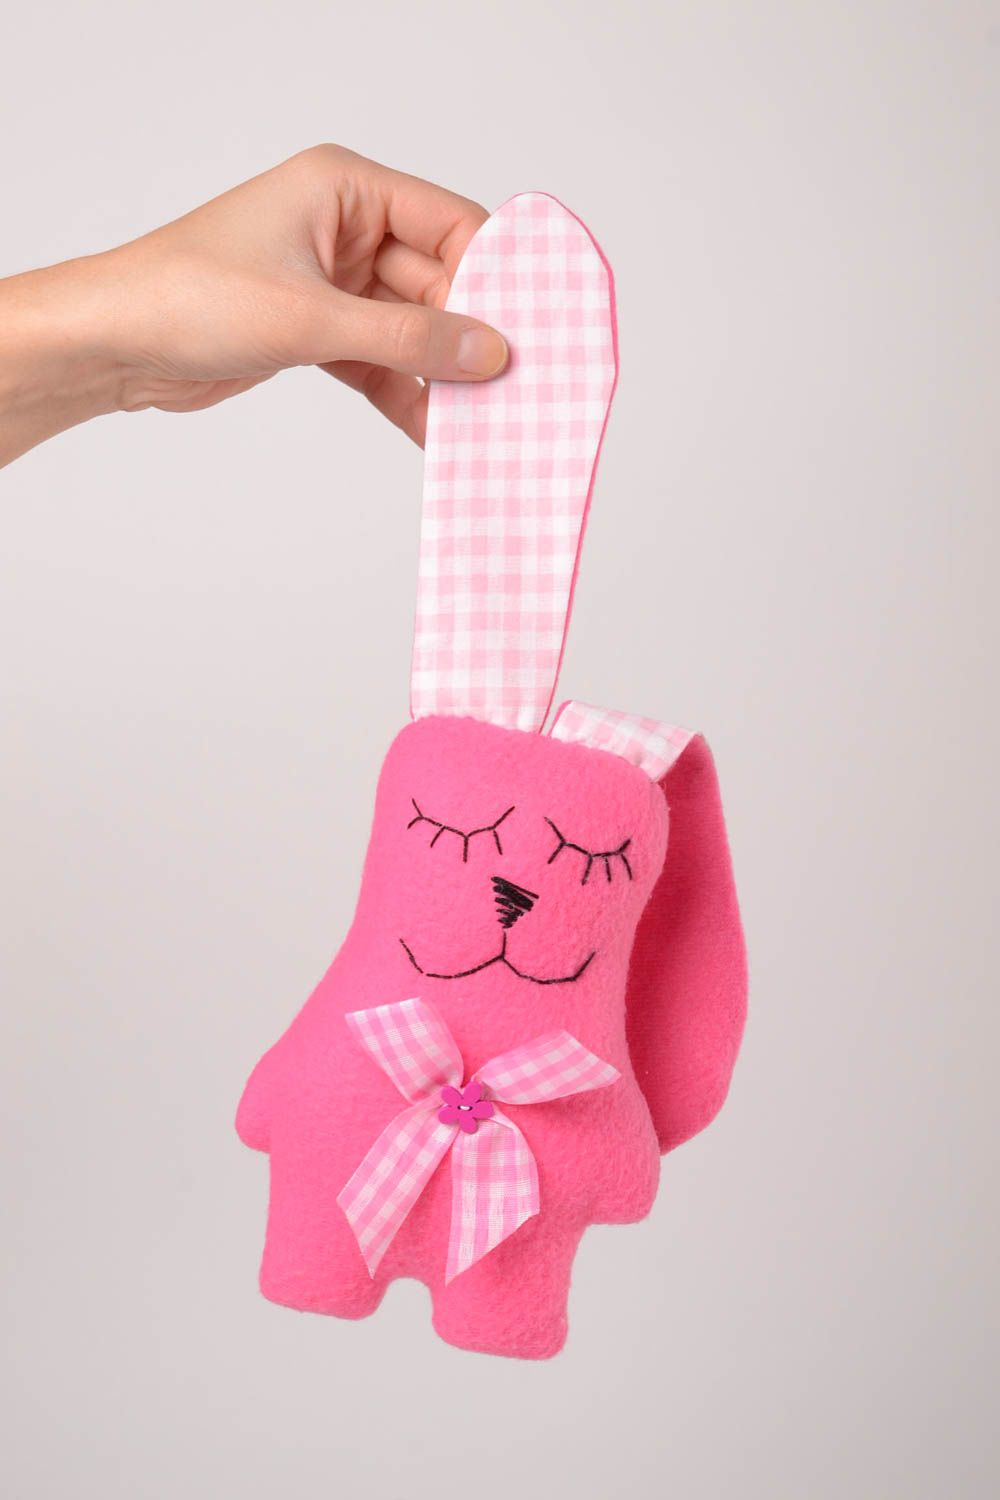 Handmade designer pink toy textile bright cute toy stylish present for kids photo 2